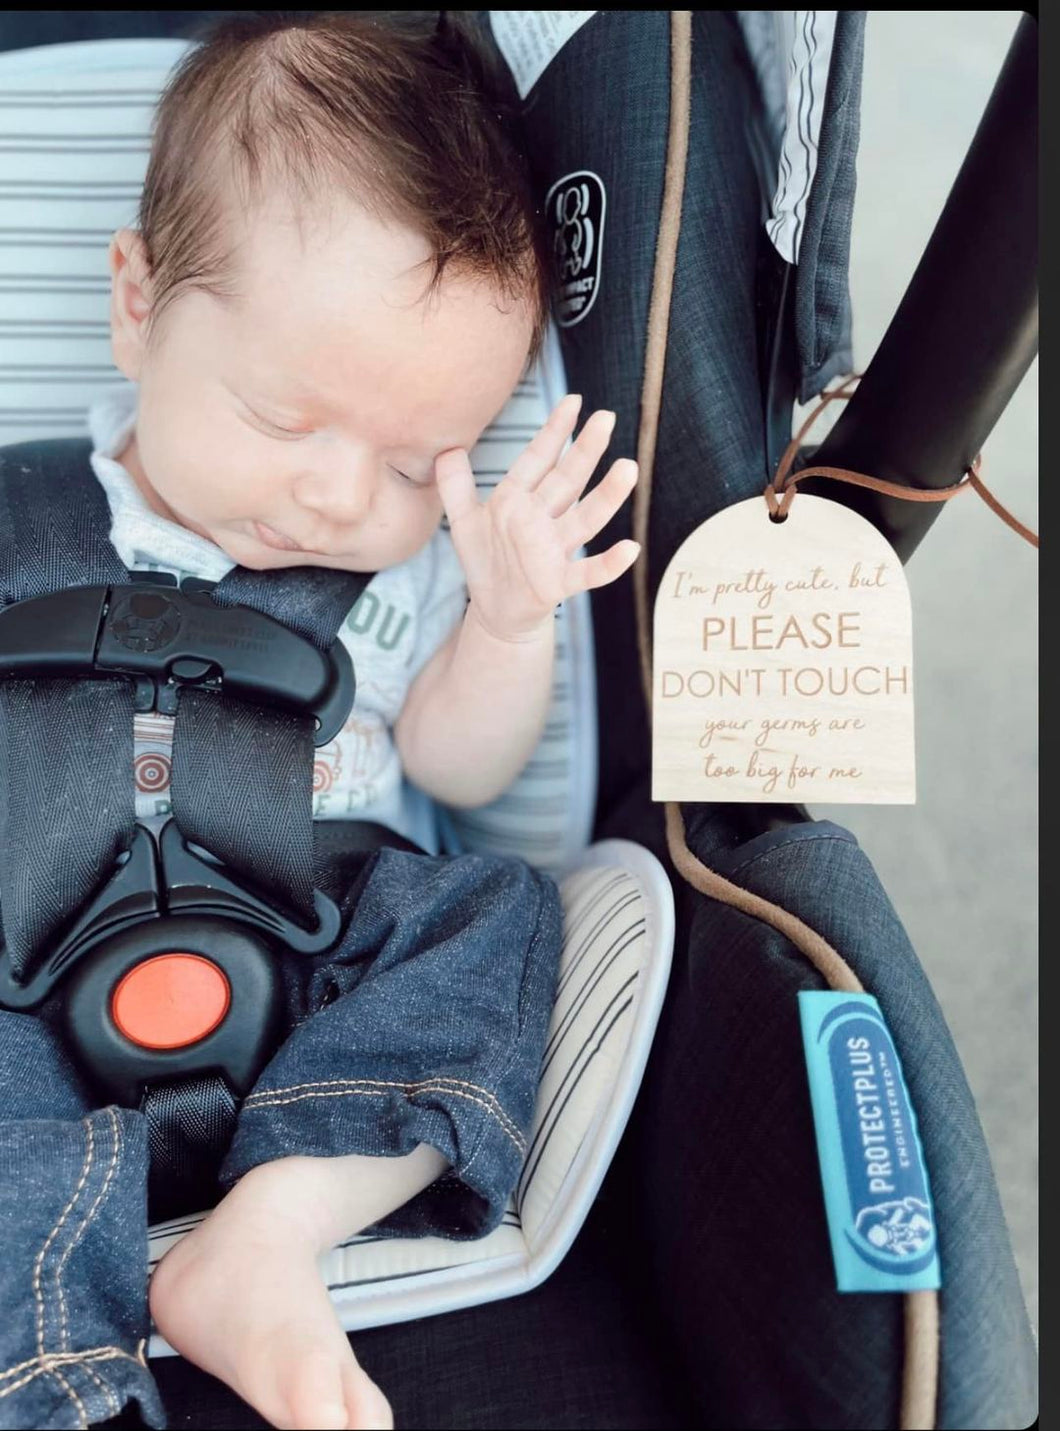 Please don't touch- your germs are too big for me- Carseat tag